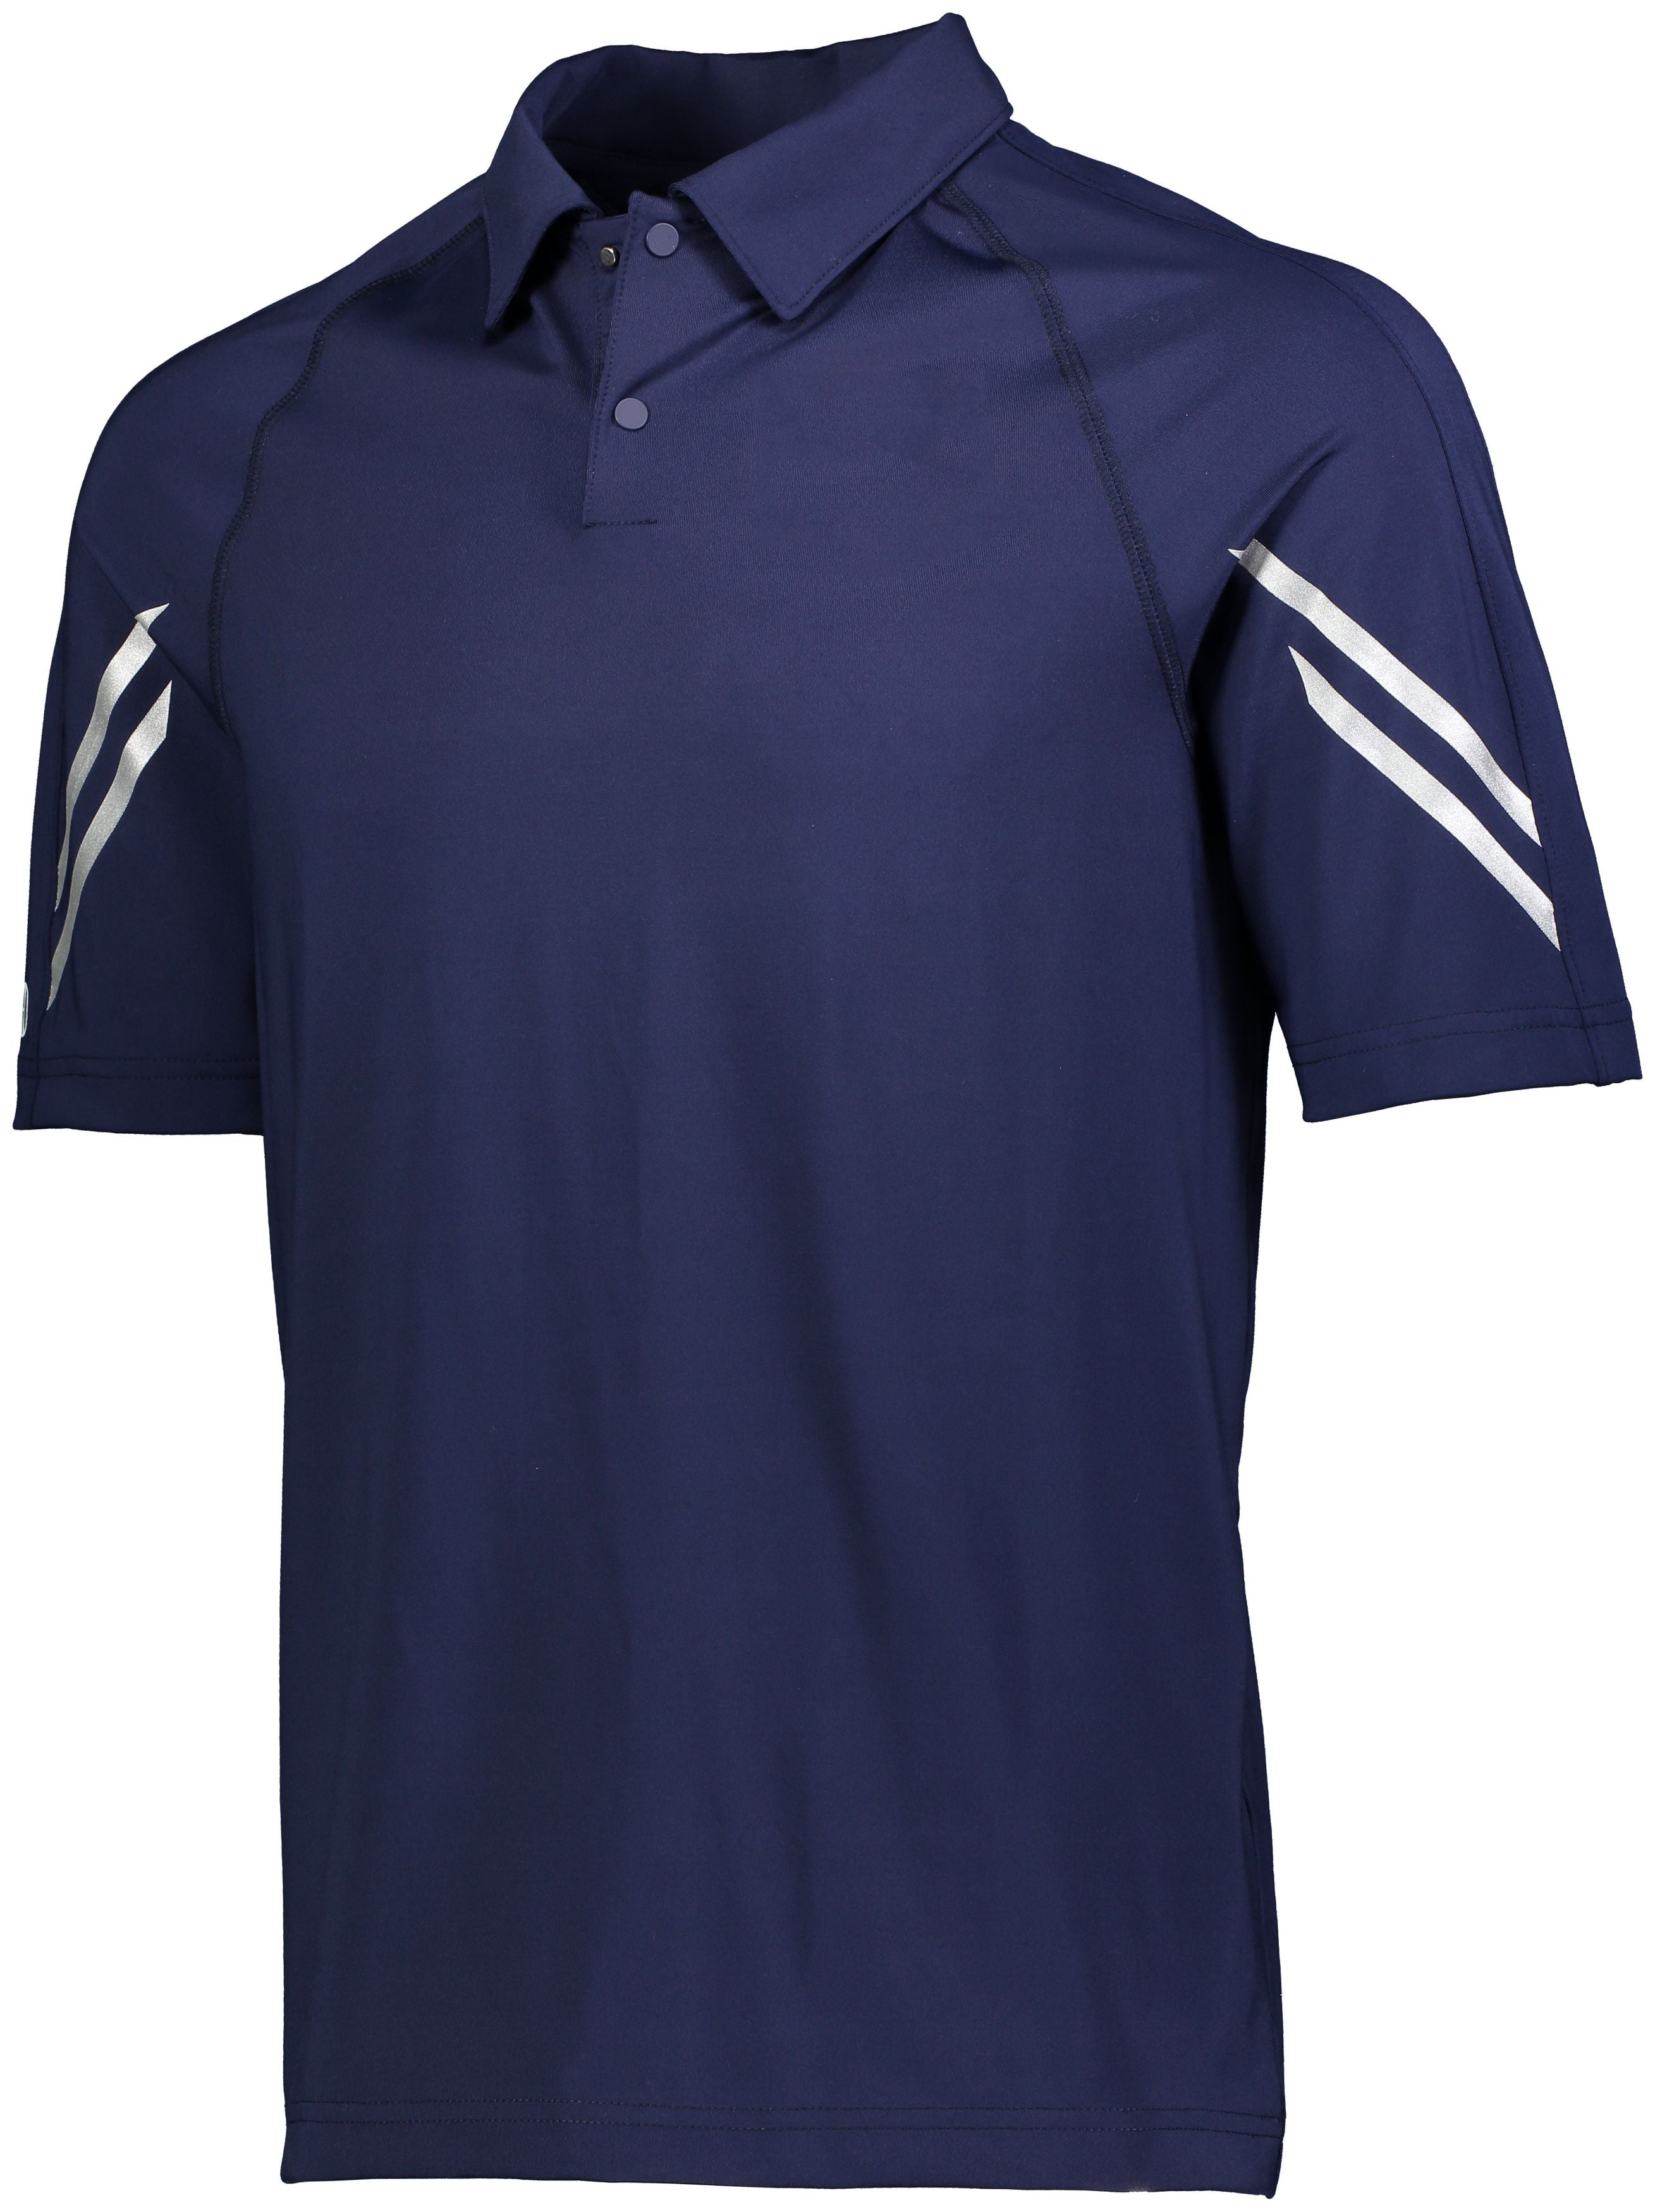 Holloway Flux Polo in Navy  -Part of the Adult, Adult-Polos, Polos, Holloway, Shirts, Flux-Collection, Corporate-Collection product lines at KanaleyCreations.com